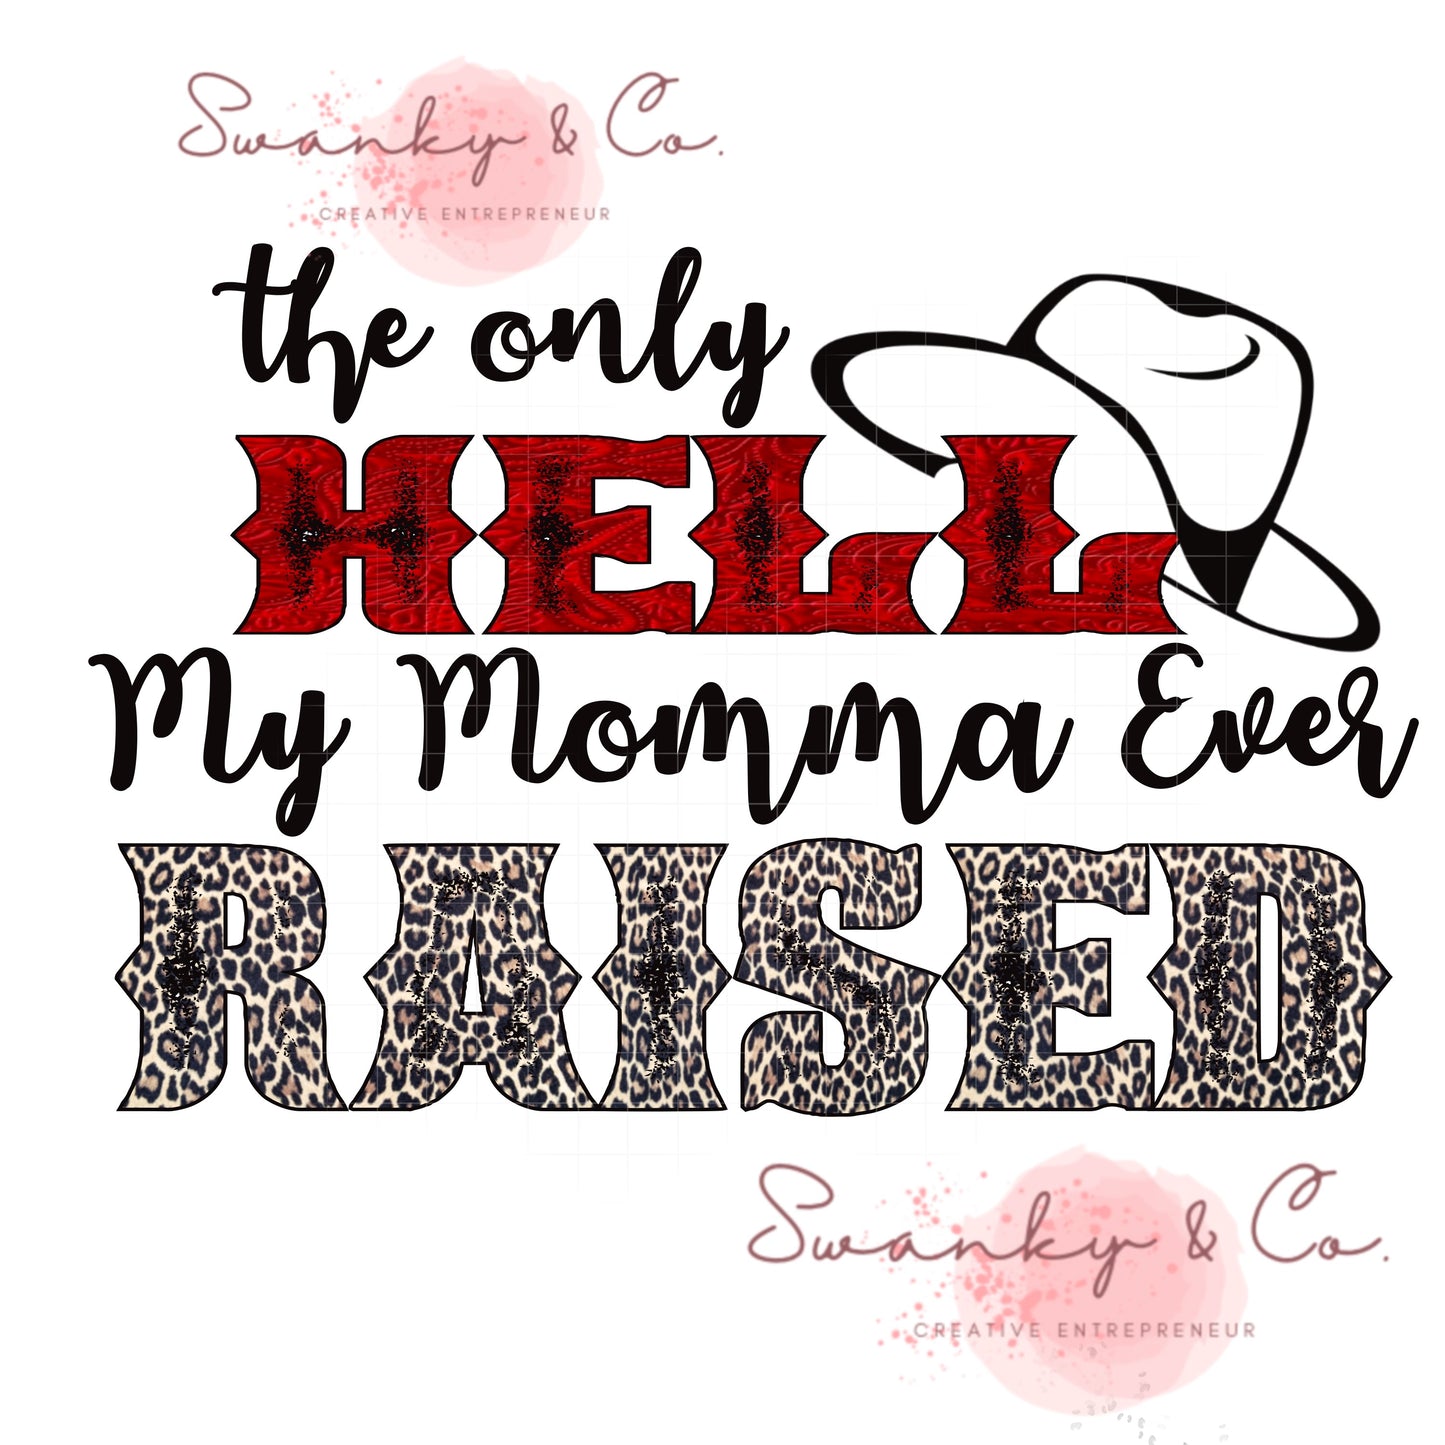 The Only Hell my Momma Ever Raised Png| Png for Sublimation | PNG Designs